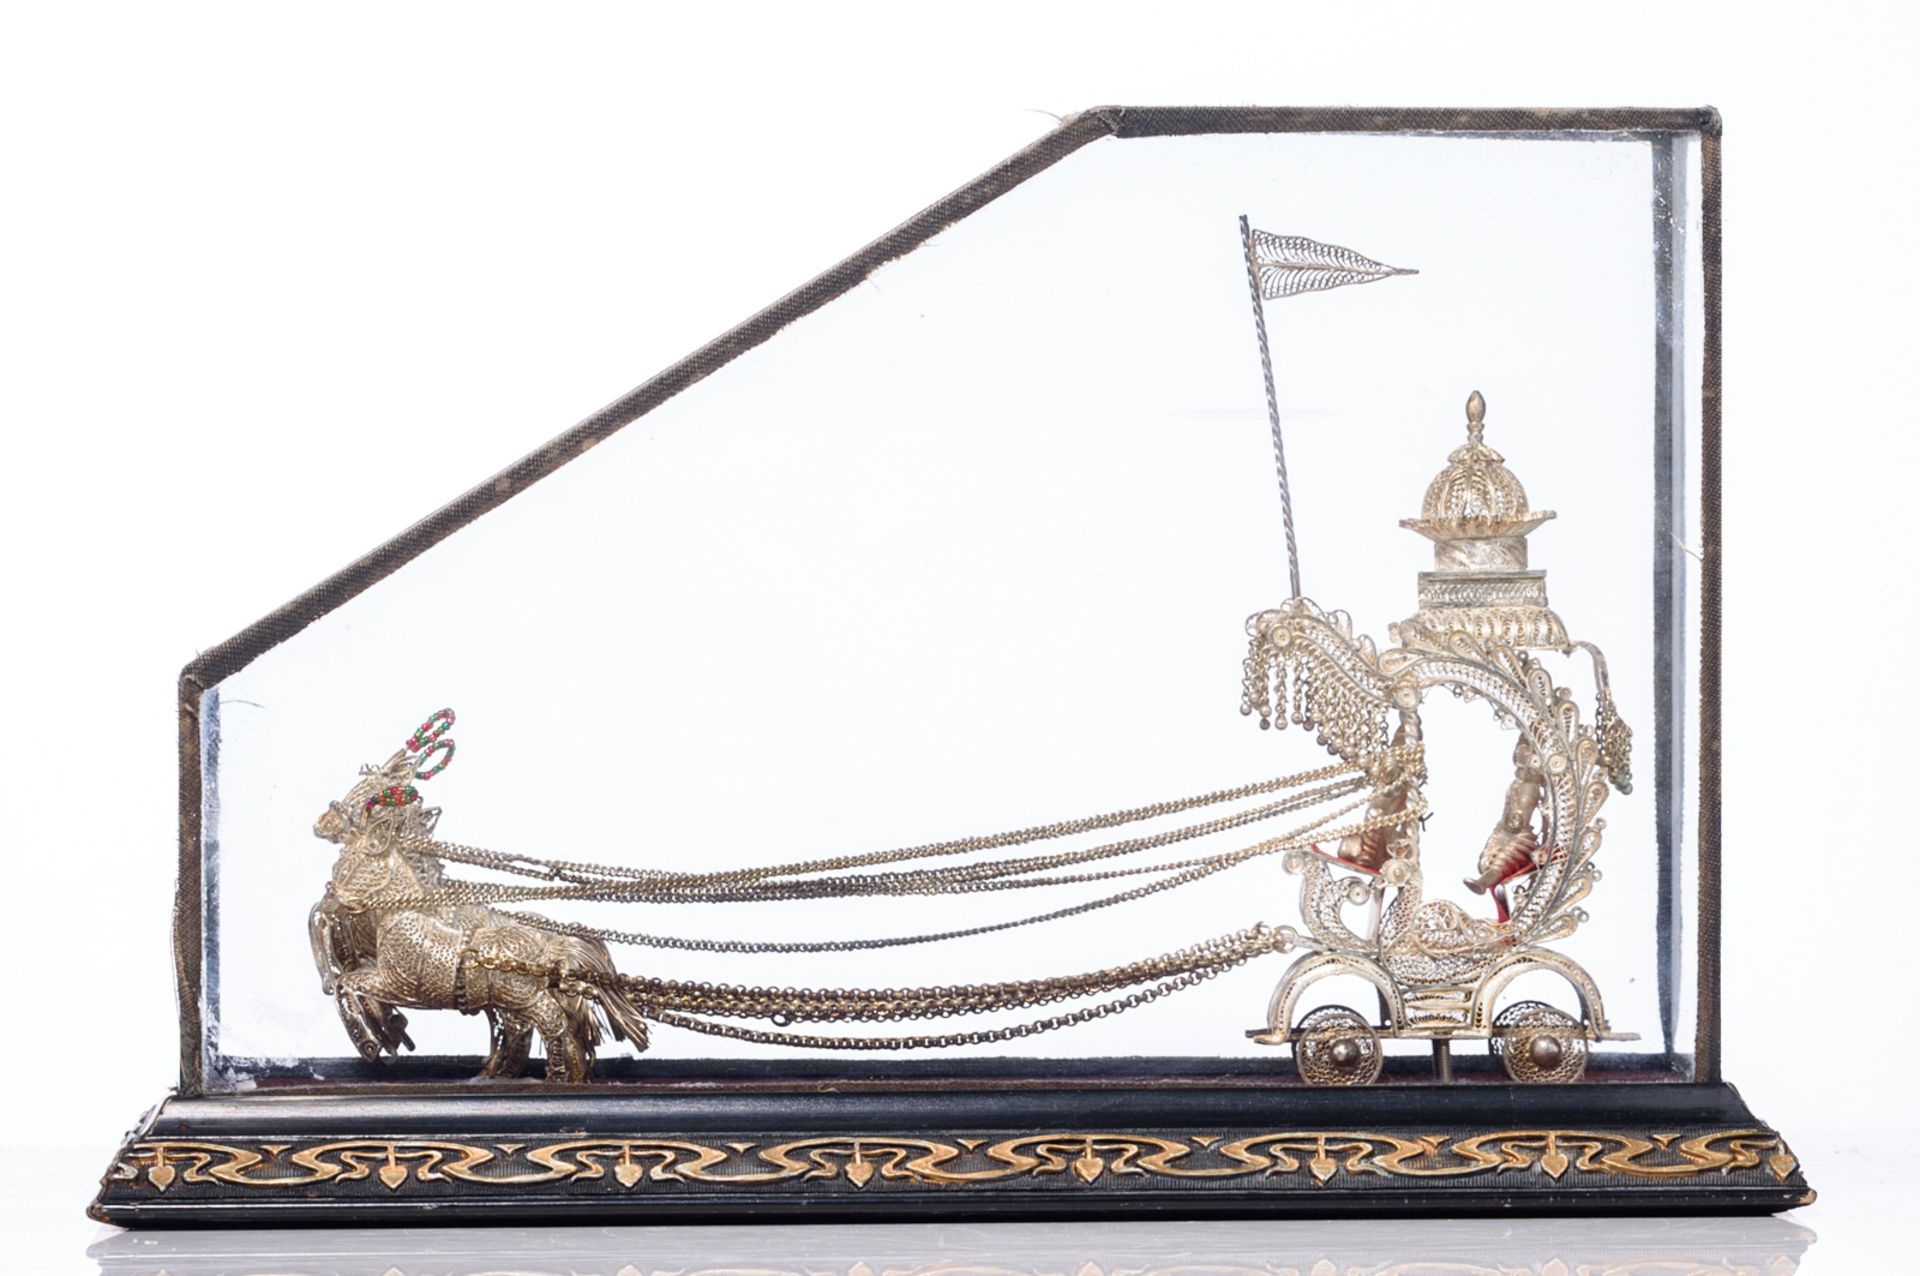 An Oriental silver filigree horse-drawn carriage, in a glass case with an Art Nouveau decorated base - Bild 2 aus 7